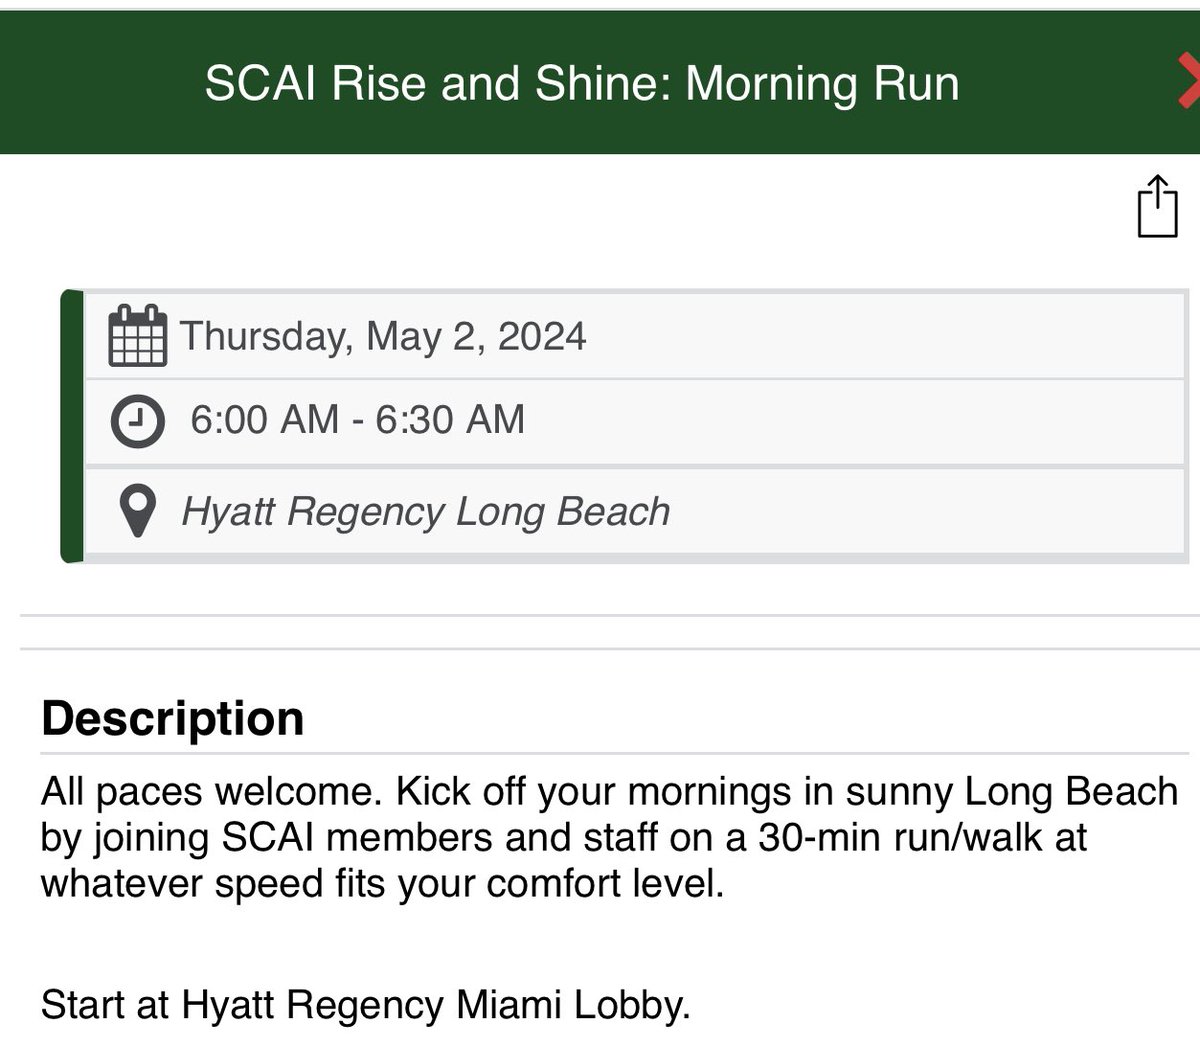 For early risers- start your day at #SCAI2024 with early morning yoga 🧘 🧘‍♂️ or run 🏃🏃‍♀️!! #HeartHealthy #Yoga @SCAI @scaiwin #ACCIC #ACCFIT #ACCEarlyCareer @ACCinTouch @isaropate @Nidhi_Madan9 @HadyLichaaMD @atunuguntla1 @sanjum @pkothapalliMD @agtruesdell @DocSavageTJU @docsaw